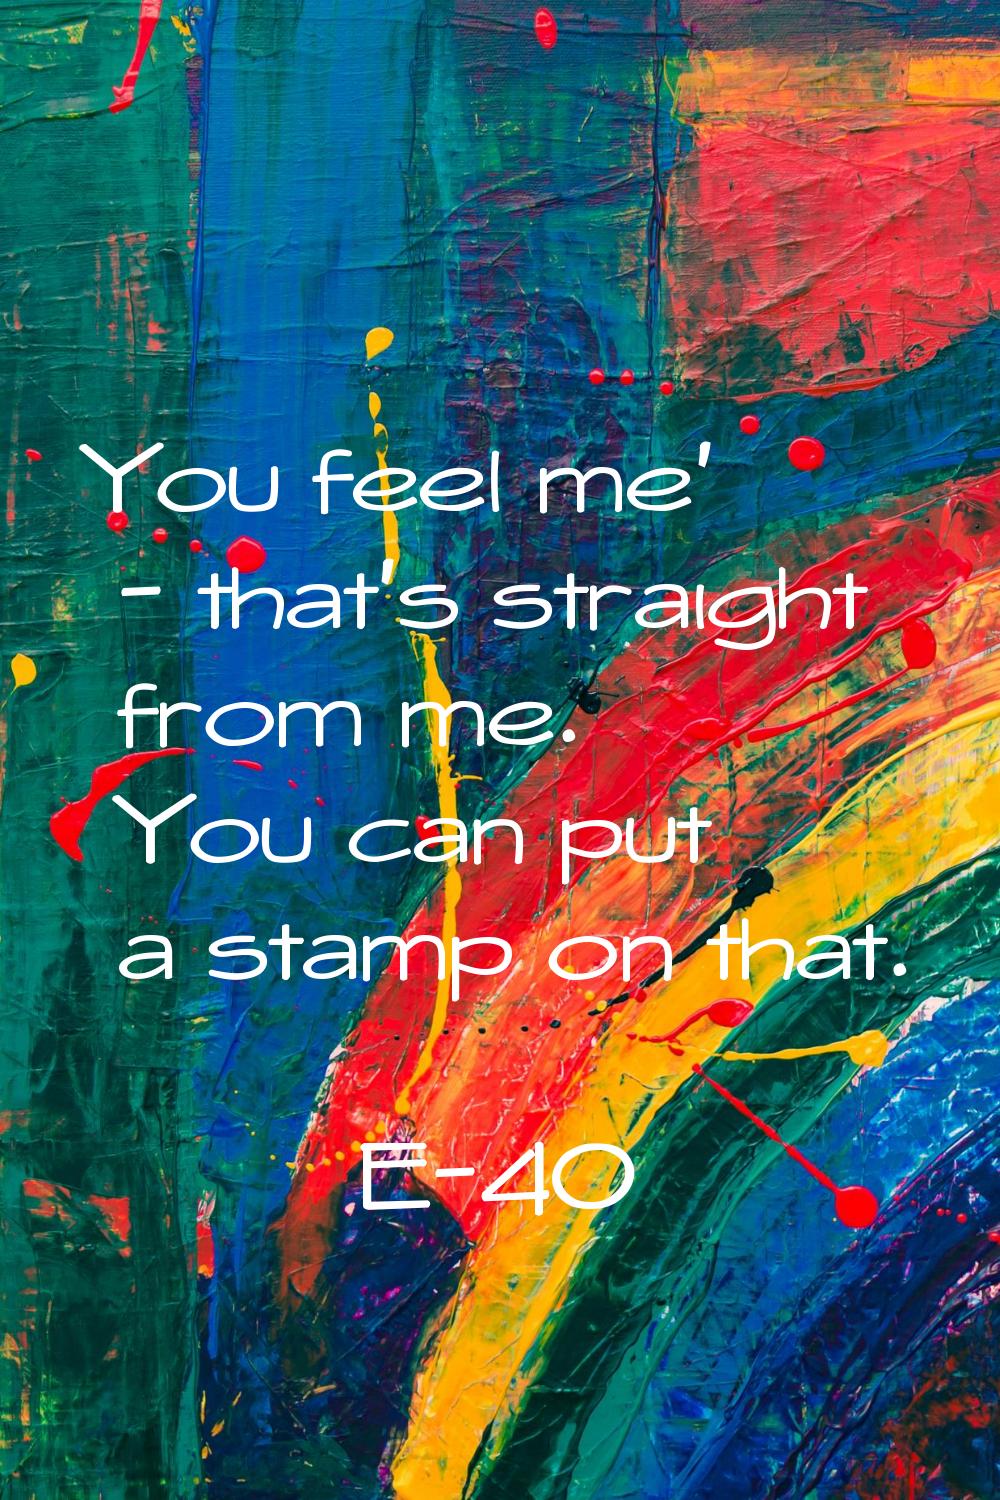 You feel me' - that's straight from me. You can put a stamp on that.